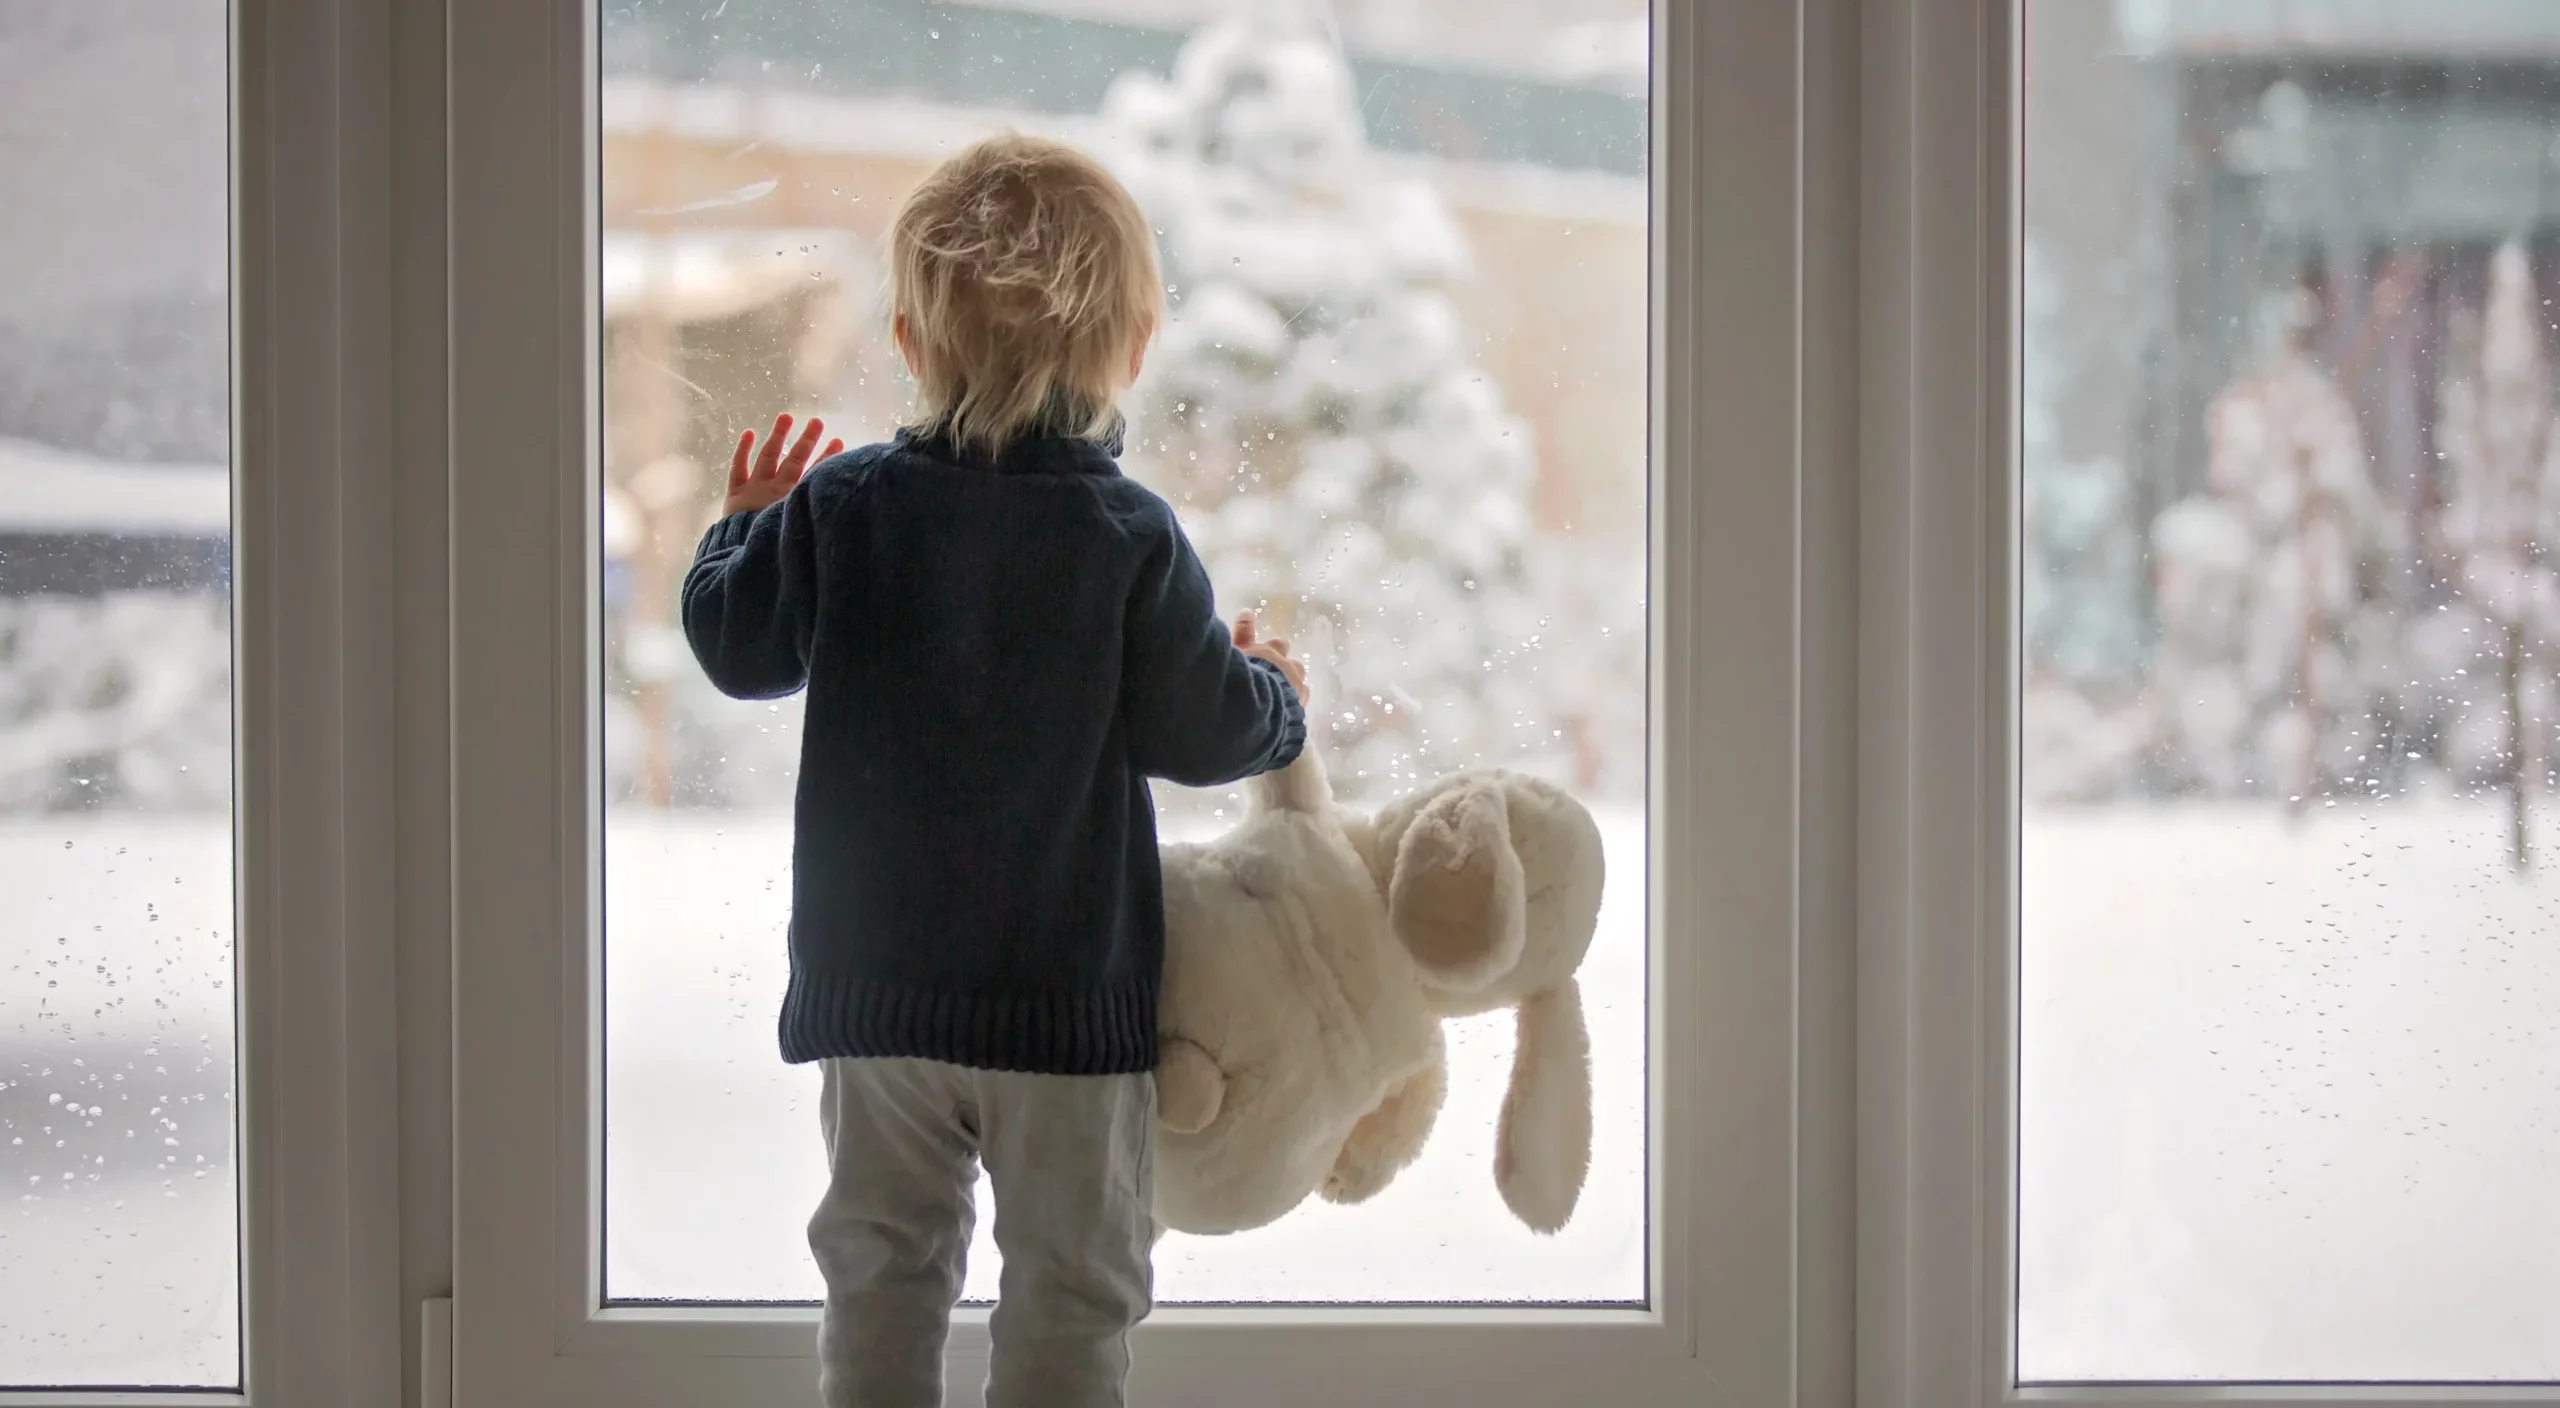 a child holding a stuffed bunny looks out a window at the slow fall